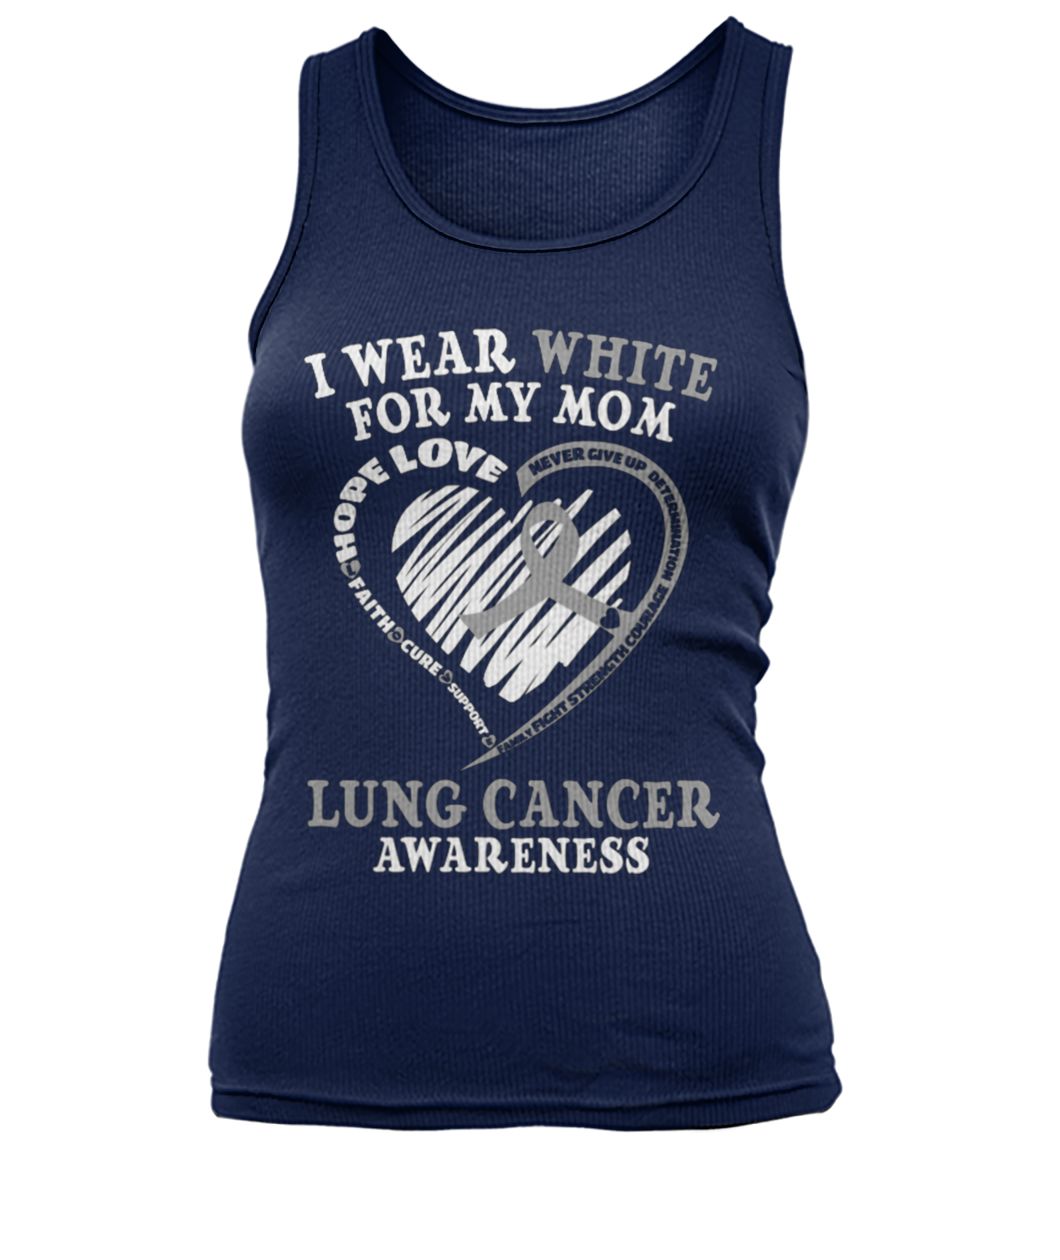 Lung cancer awareness I wear white for my mom women's tank top